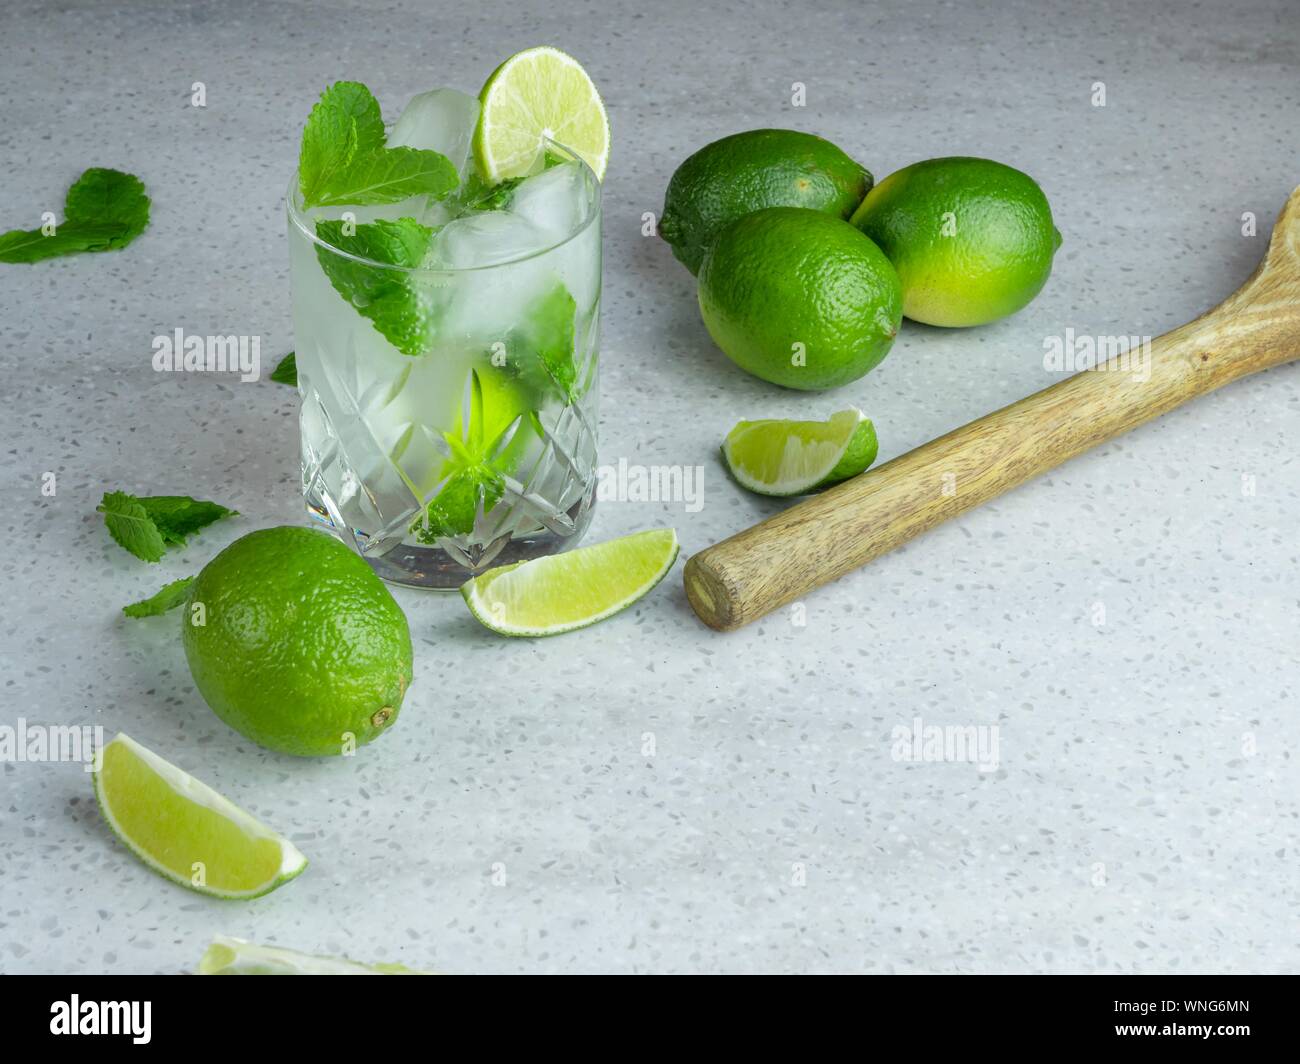 A mojito cocktail made from fresh mint and lime in a cut glass tumbler against a pale background Stock Photo